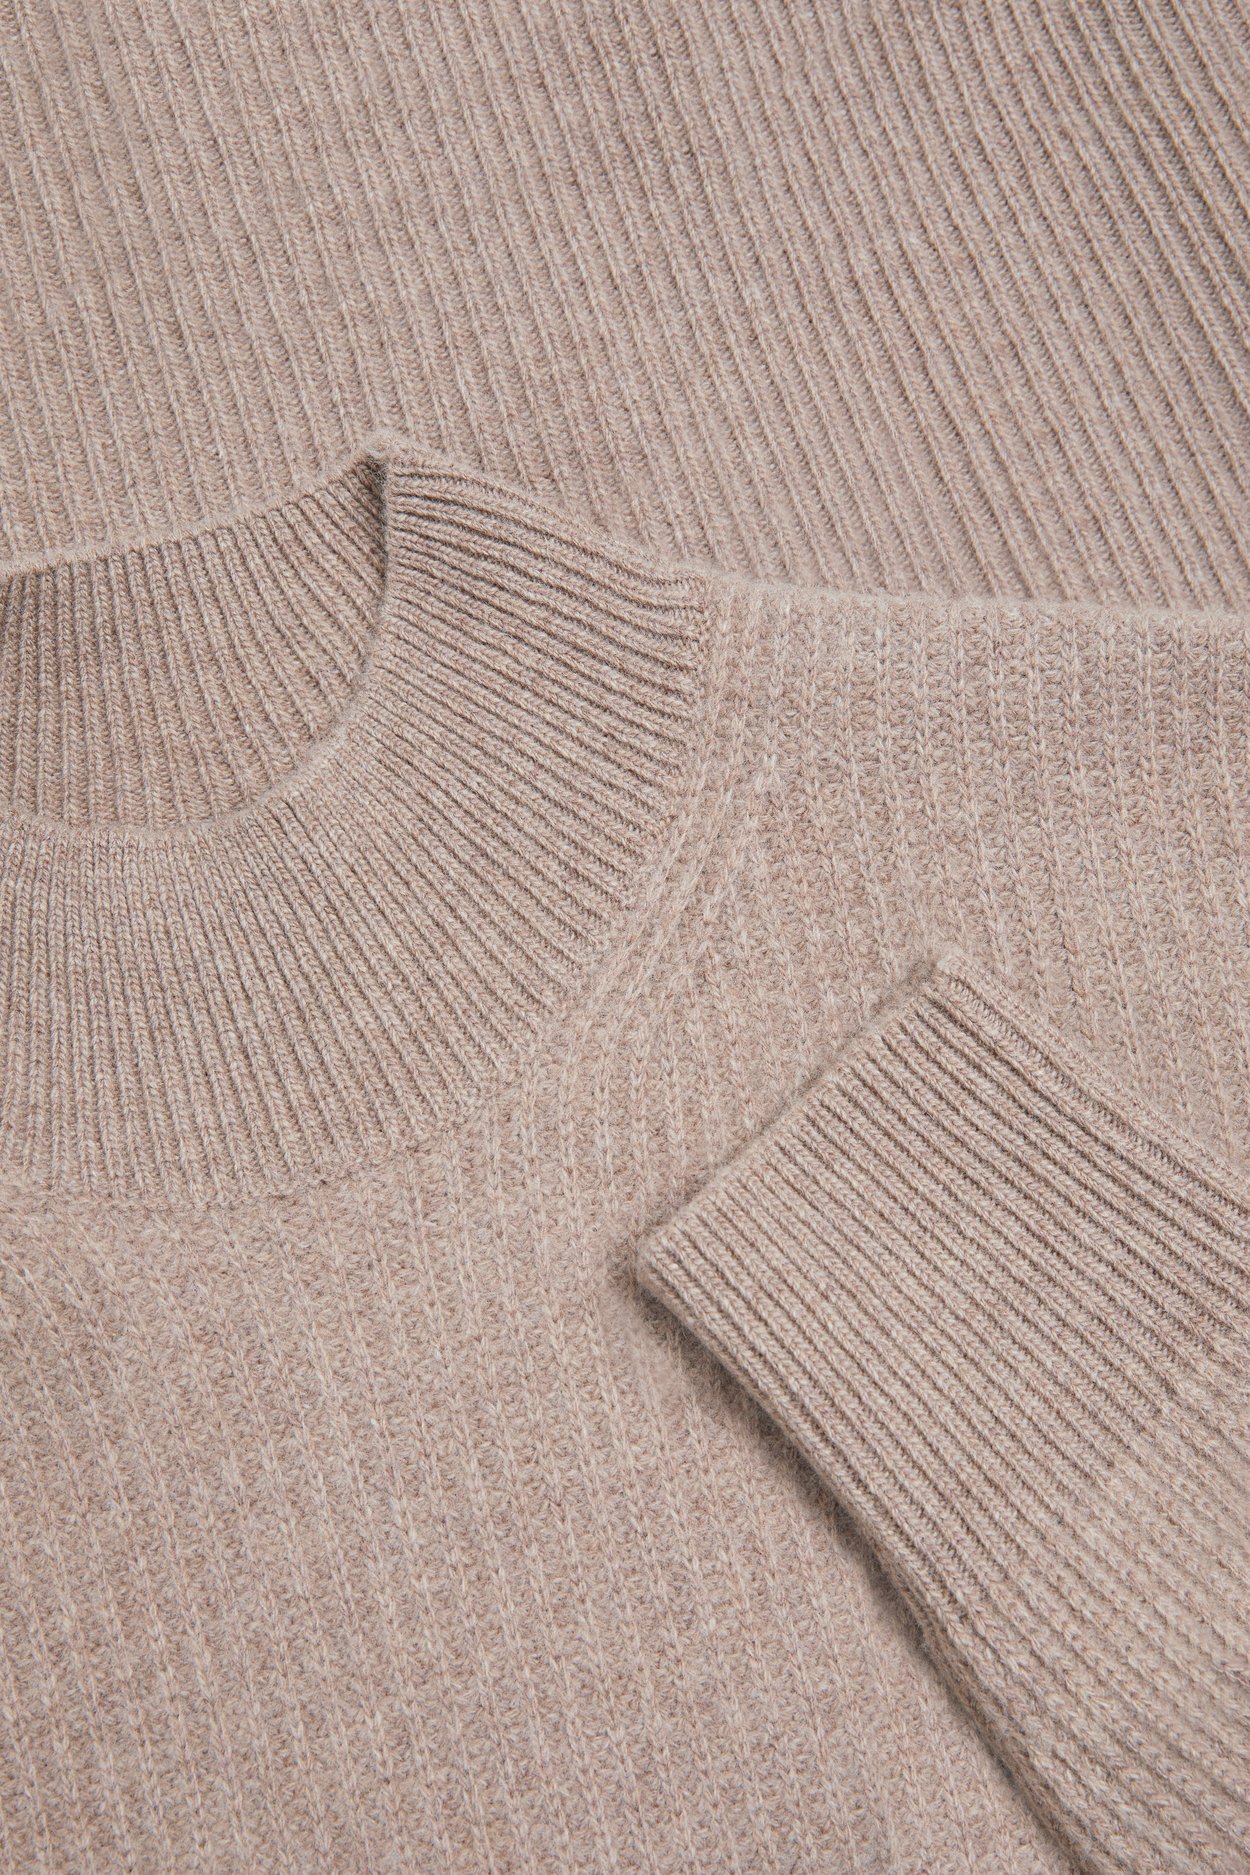 The chunky knit made of 100% recycled wool, now available in two new colors